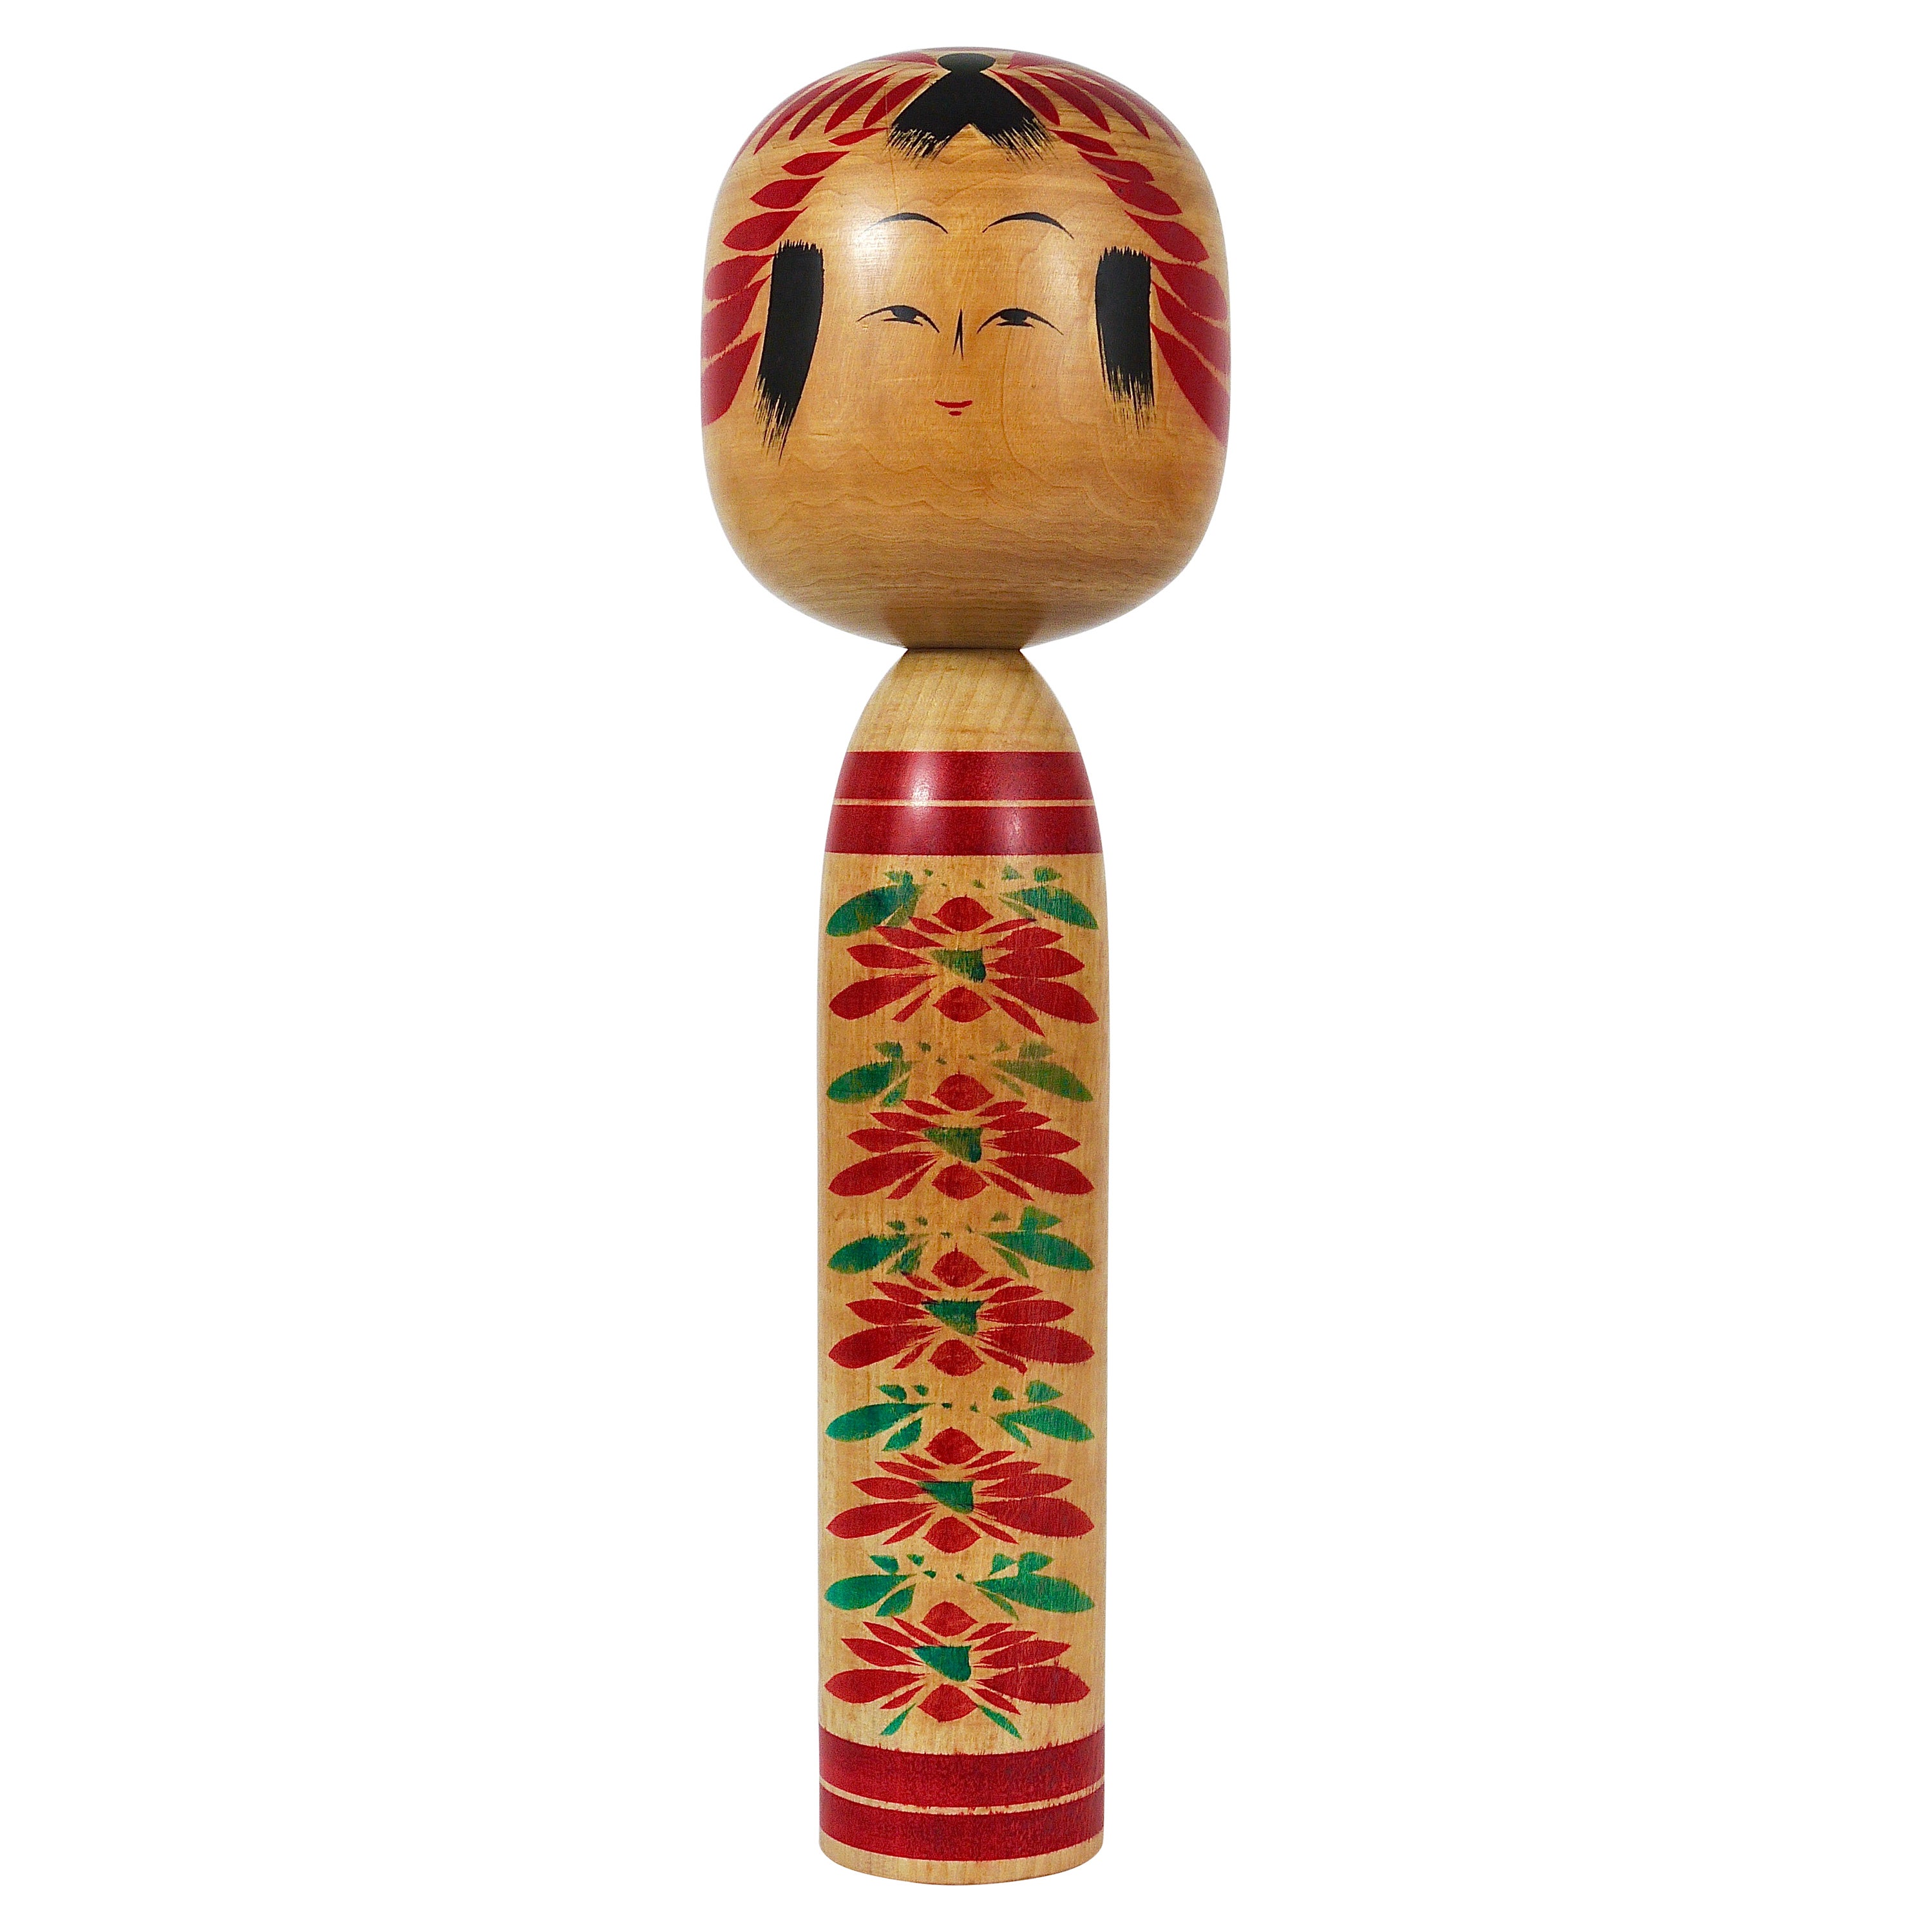 Decorative Togatta Kokeshi Doll Sculpture from Northern Japan, Hand-Painted